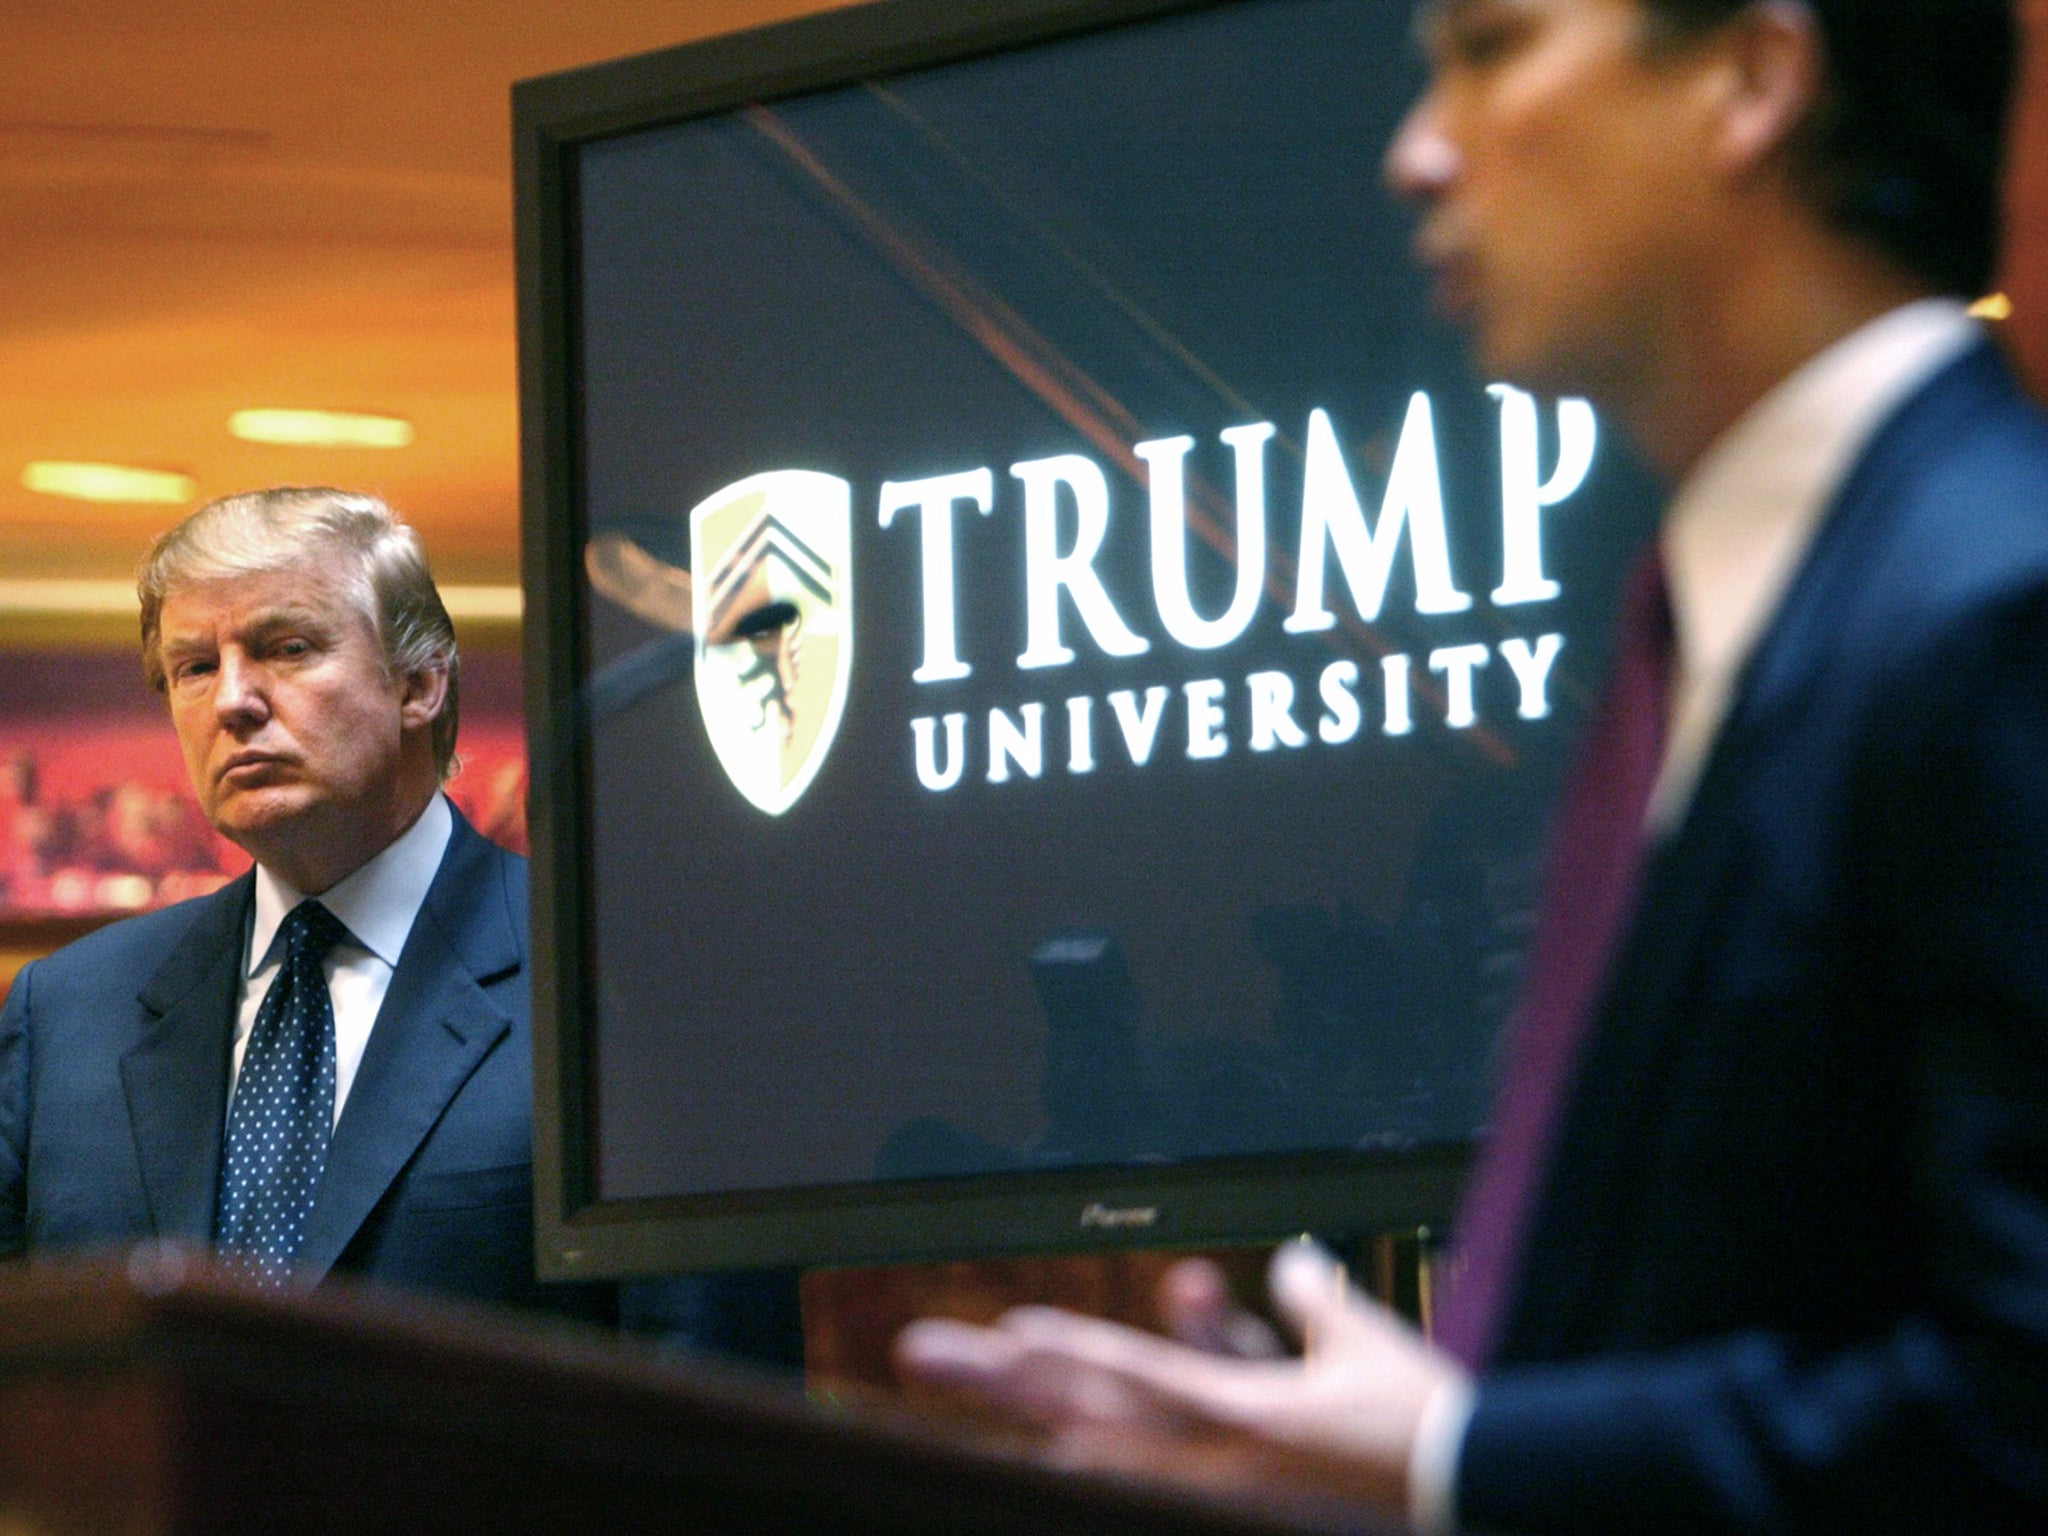 Donald trump may have to go to trial on fraud charges over fees charged by his for-profit Trump University